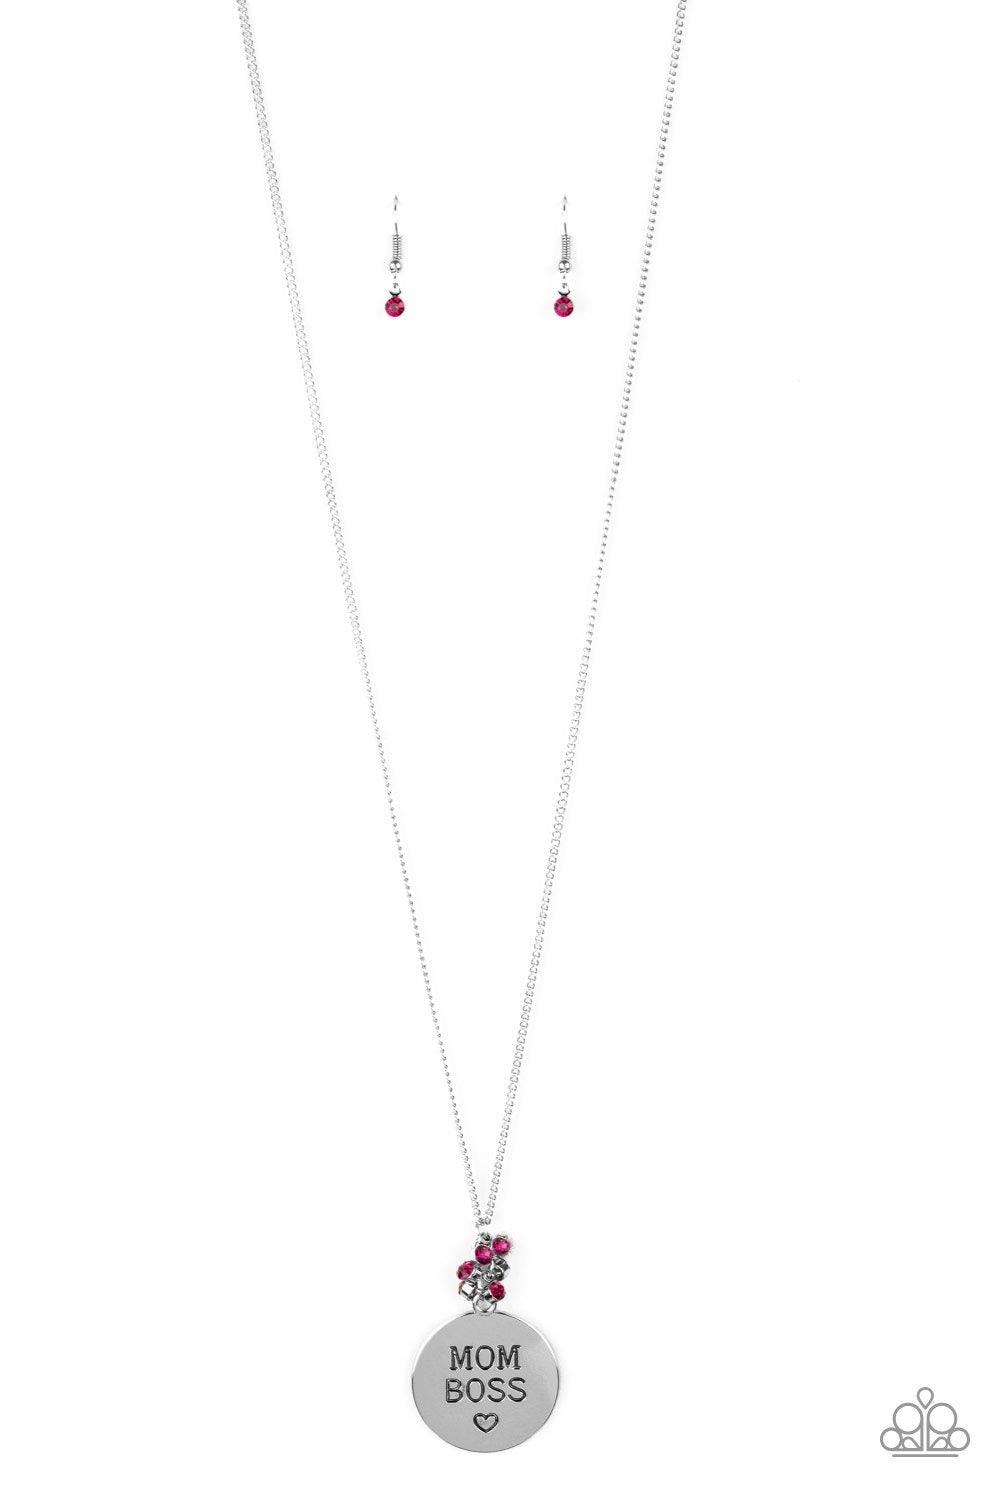 Paparazzi Accessories Mom Boss - Pink Infused with a cluster of glassy pink rhinestones, a shimmery silver disc is stamped with the inspirational phrase, "Mom Boss", for a whimsical look. Features an adjustable clasp closure. Sold as one individual neckla